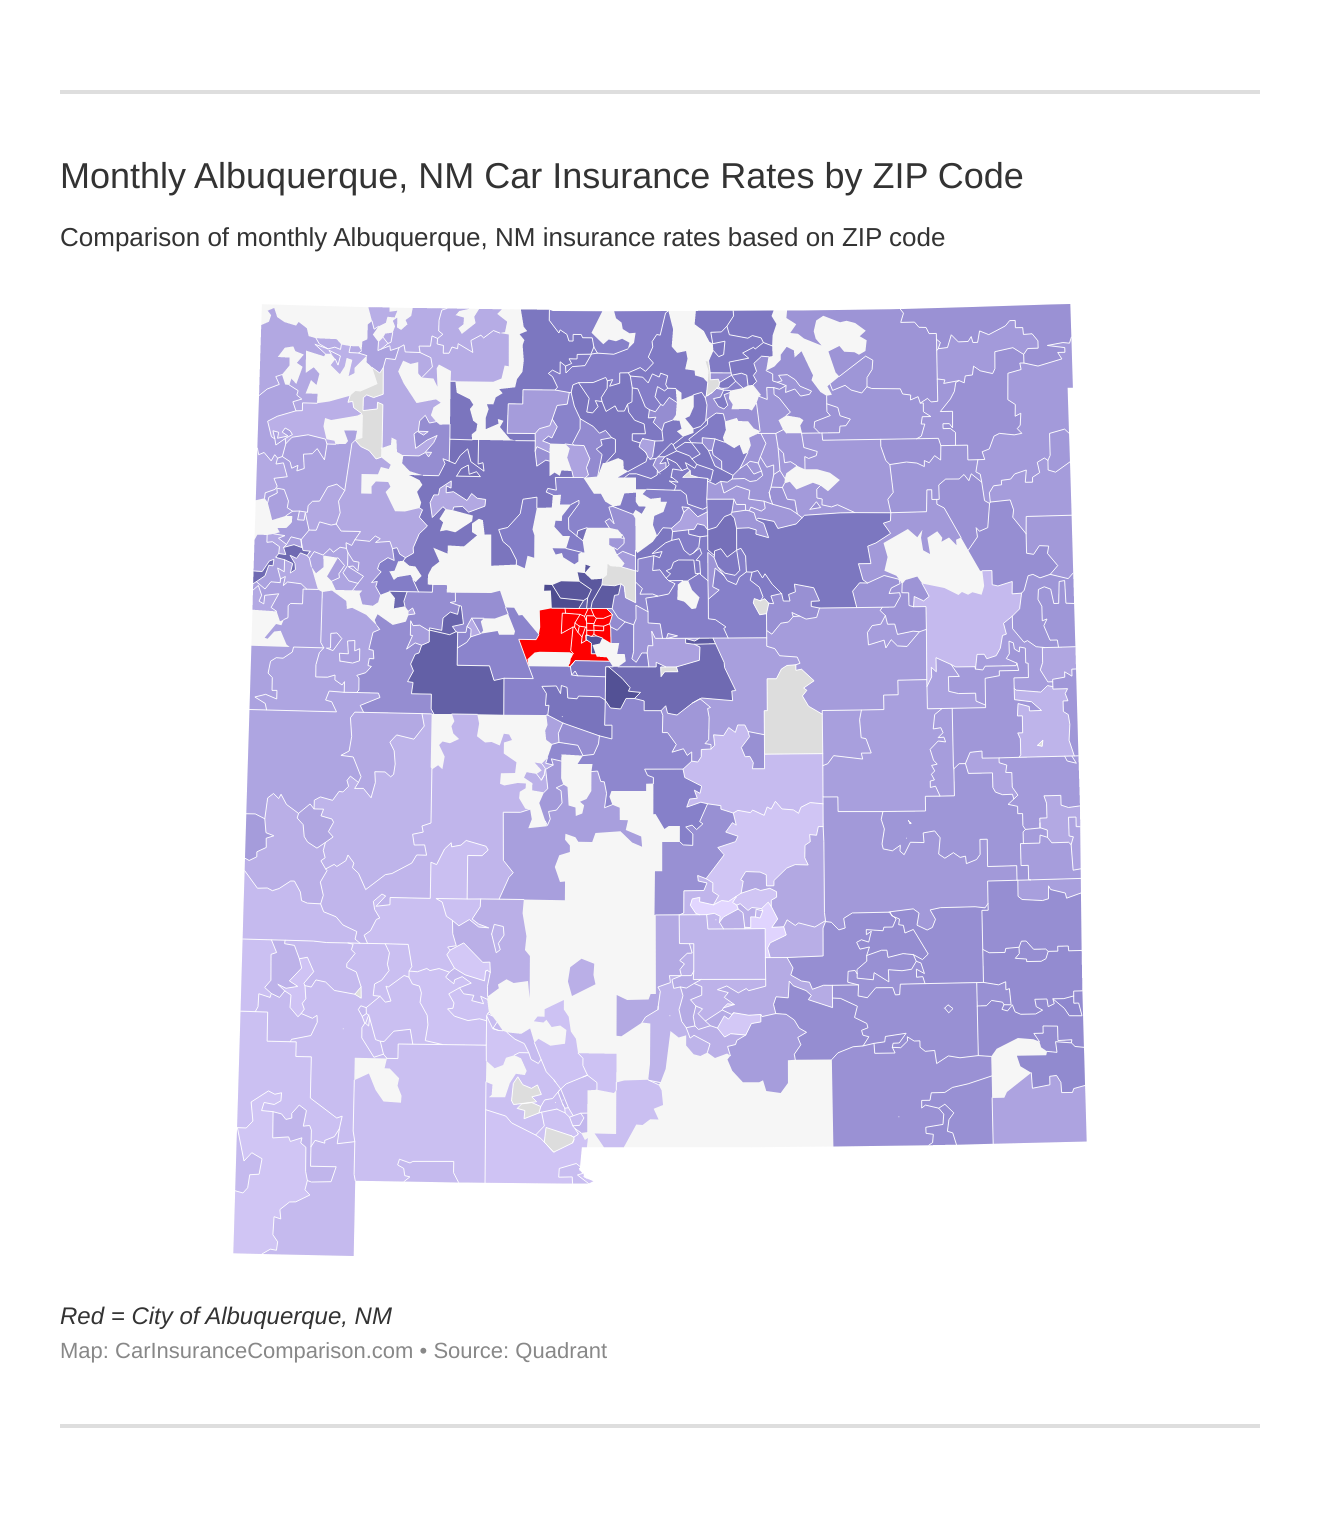 Monthly Albuquerque, NM Car Insurance Rates by ZIP Code